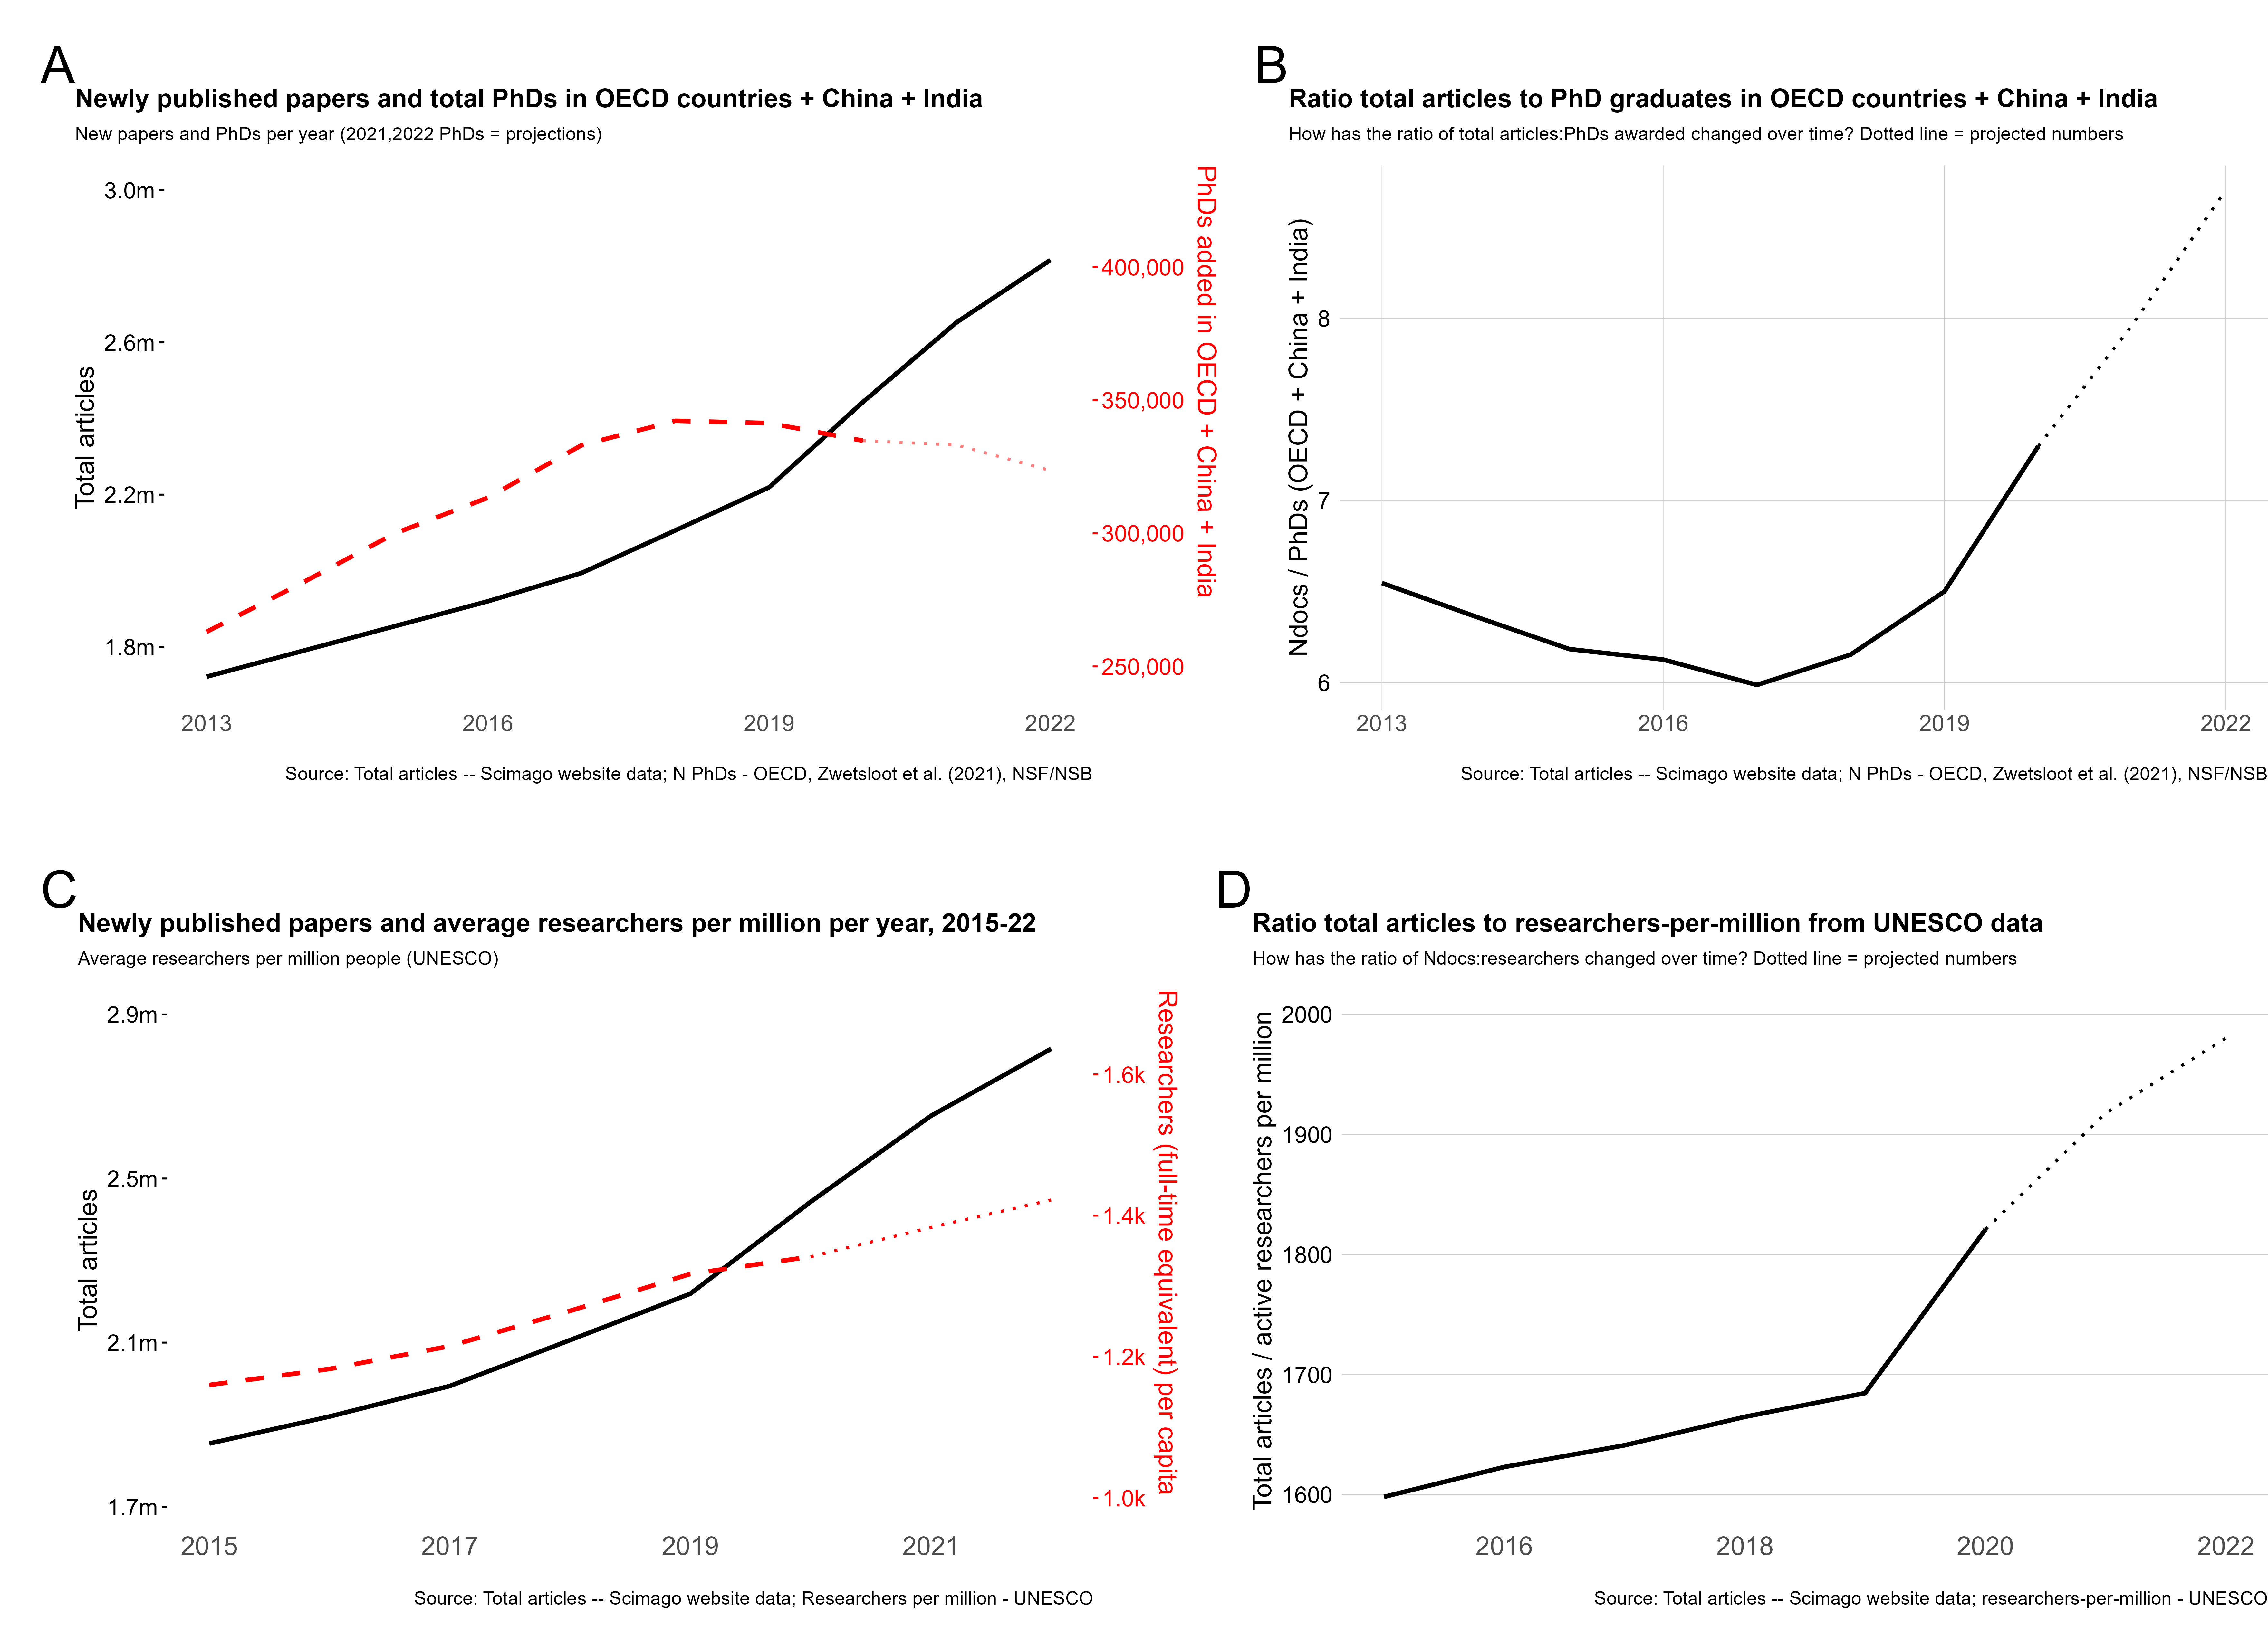 Fig. 1supp1 from The Strain on Scientific Publishing: the growing disparity between total articles per year and active researchers is robust to use of alternate datasets. Dotted lines indicate estimated trends. A) OECD data complemented with total STEM PhD graduates from India and China (dashed red line) does not alter the pattern of an overall decline in recent years. B) The ratio of total articles to total PhD graduates has gone up substantially since 2019. C) UNESCO data instead using total active researchers (full-time equivalent) per million people shows a similar trend. Of note, this proxy for active researchers may include non-publishing scientists (private industry, governmental) that are not participating in the strain on scientific publishing in the same way that academic scientists are. D) Nevertheless, using UNESCO data the ratio of total articles to total active researchers has gone up substantially since 2019.